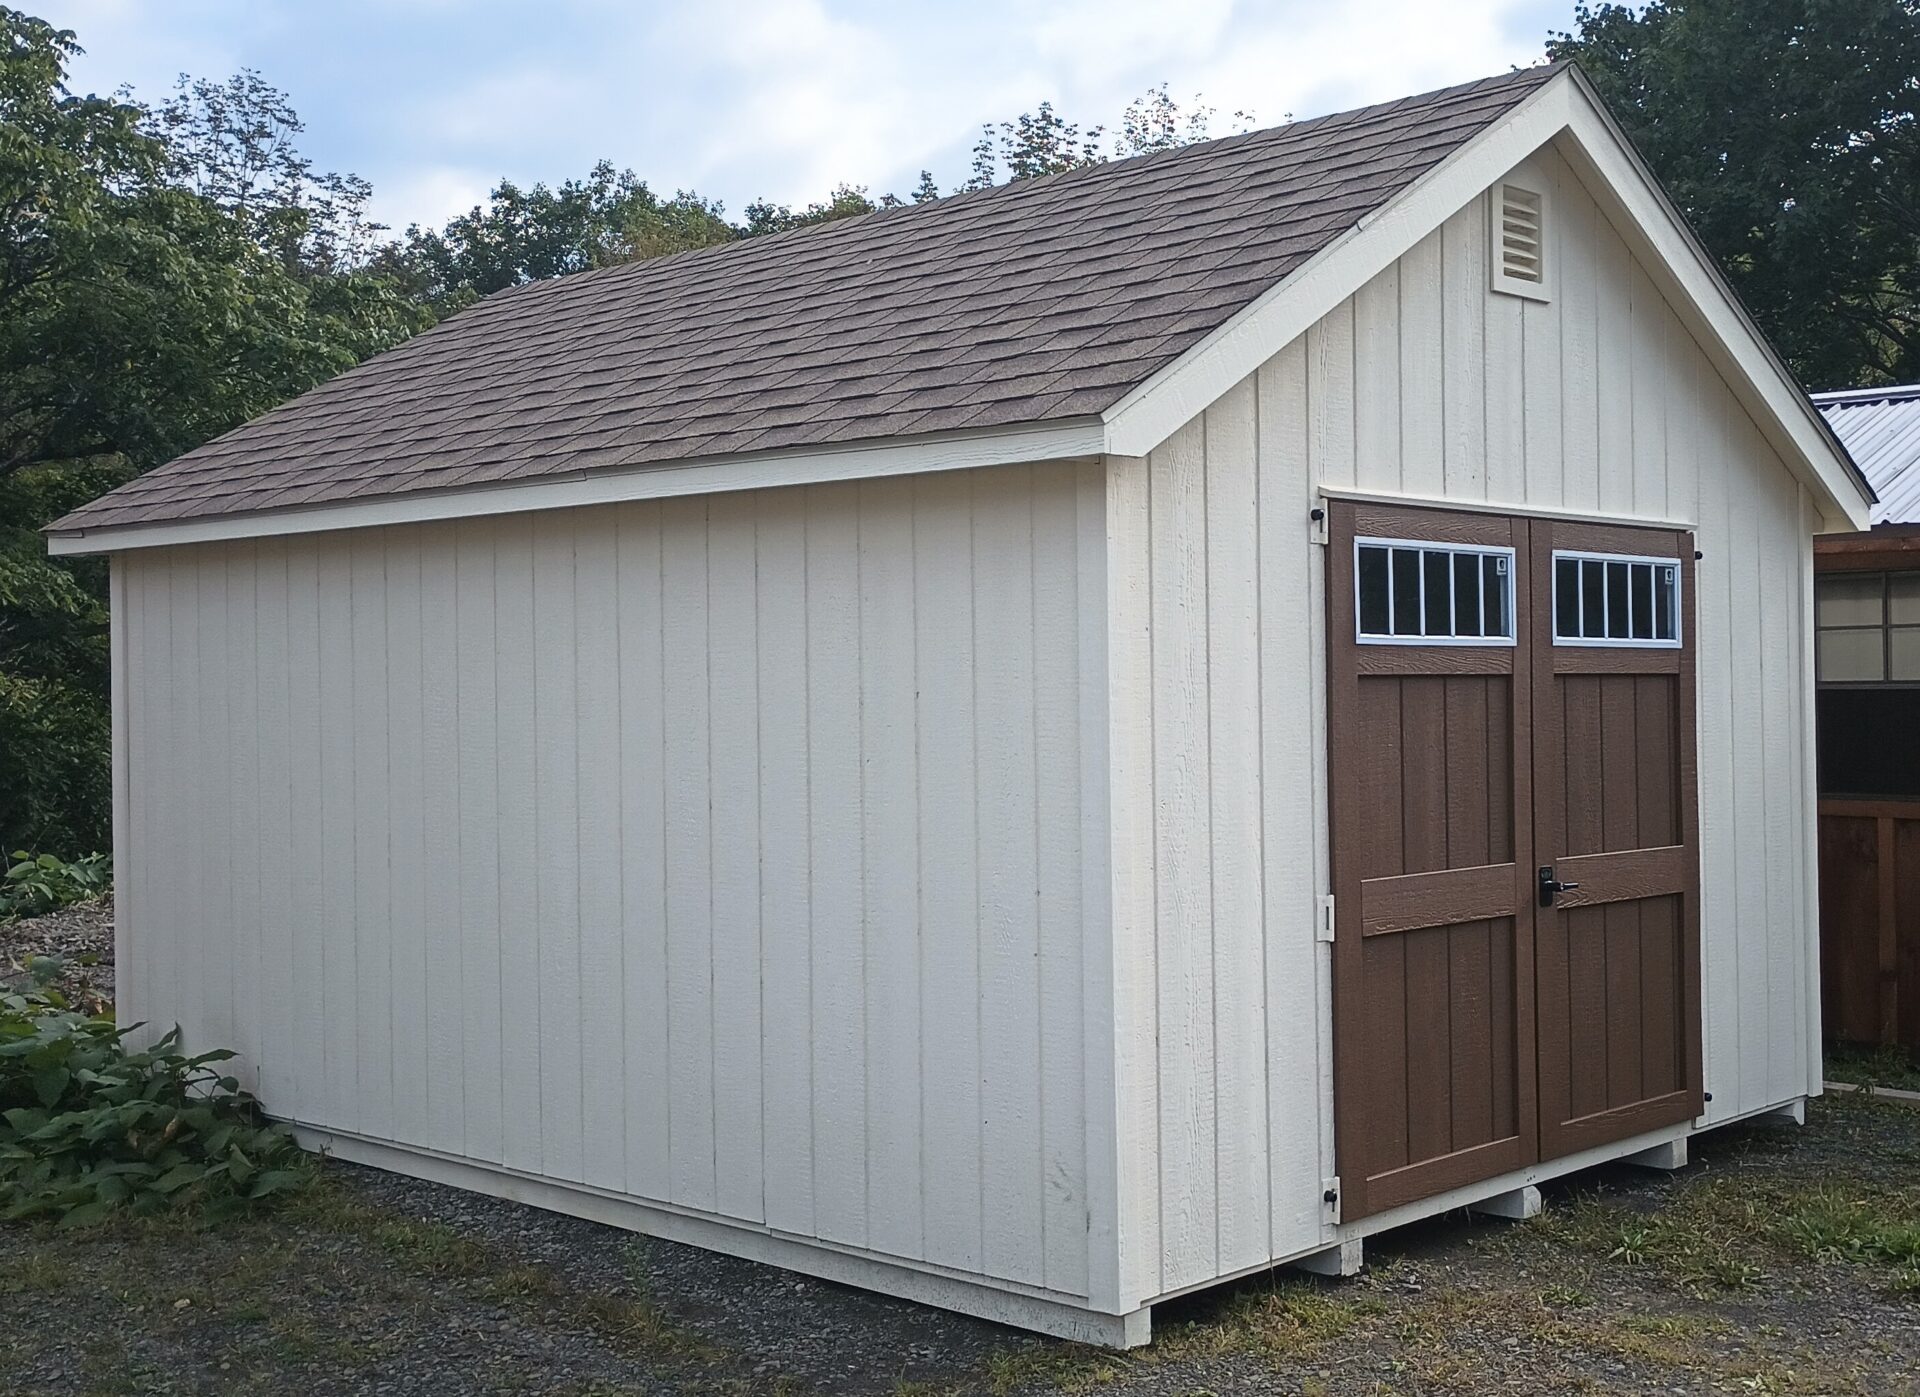 Cream color shed with brown doors